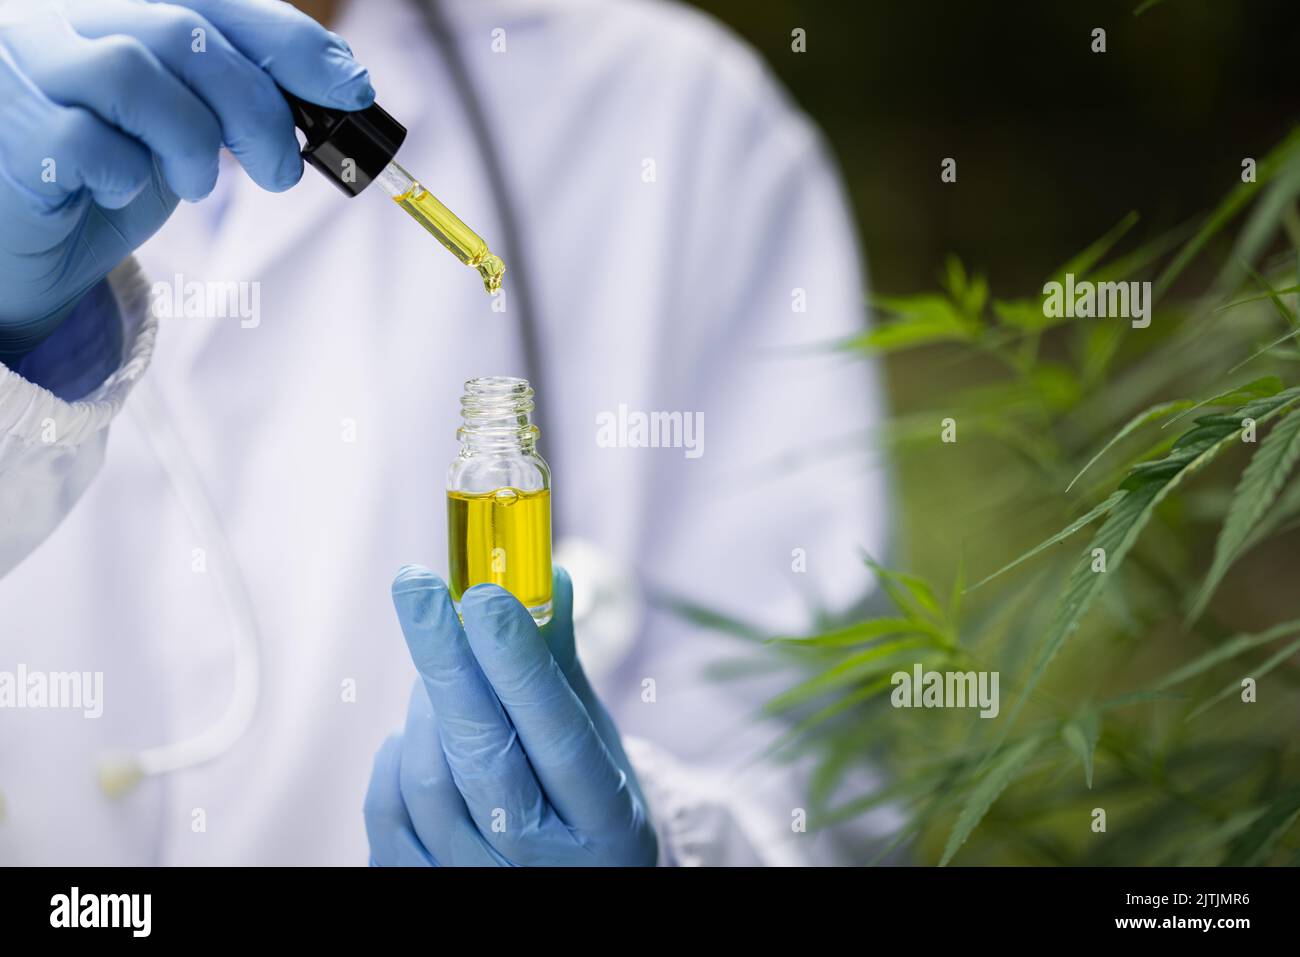 Researchers are examining the plants. alternative medicine and cannabis concepts, professional researchers working in cannabis fields Stock Photo